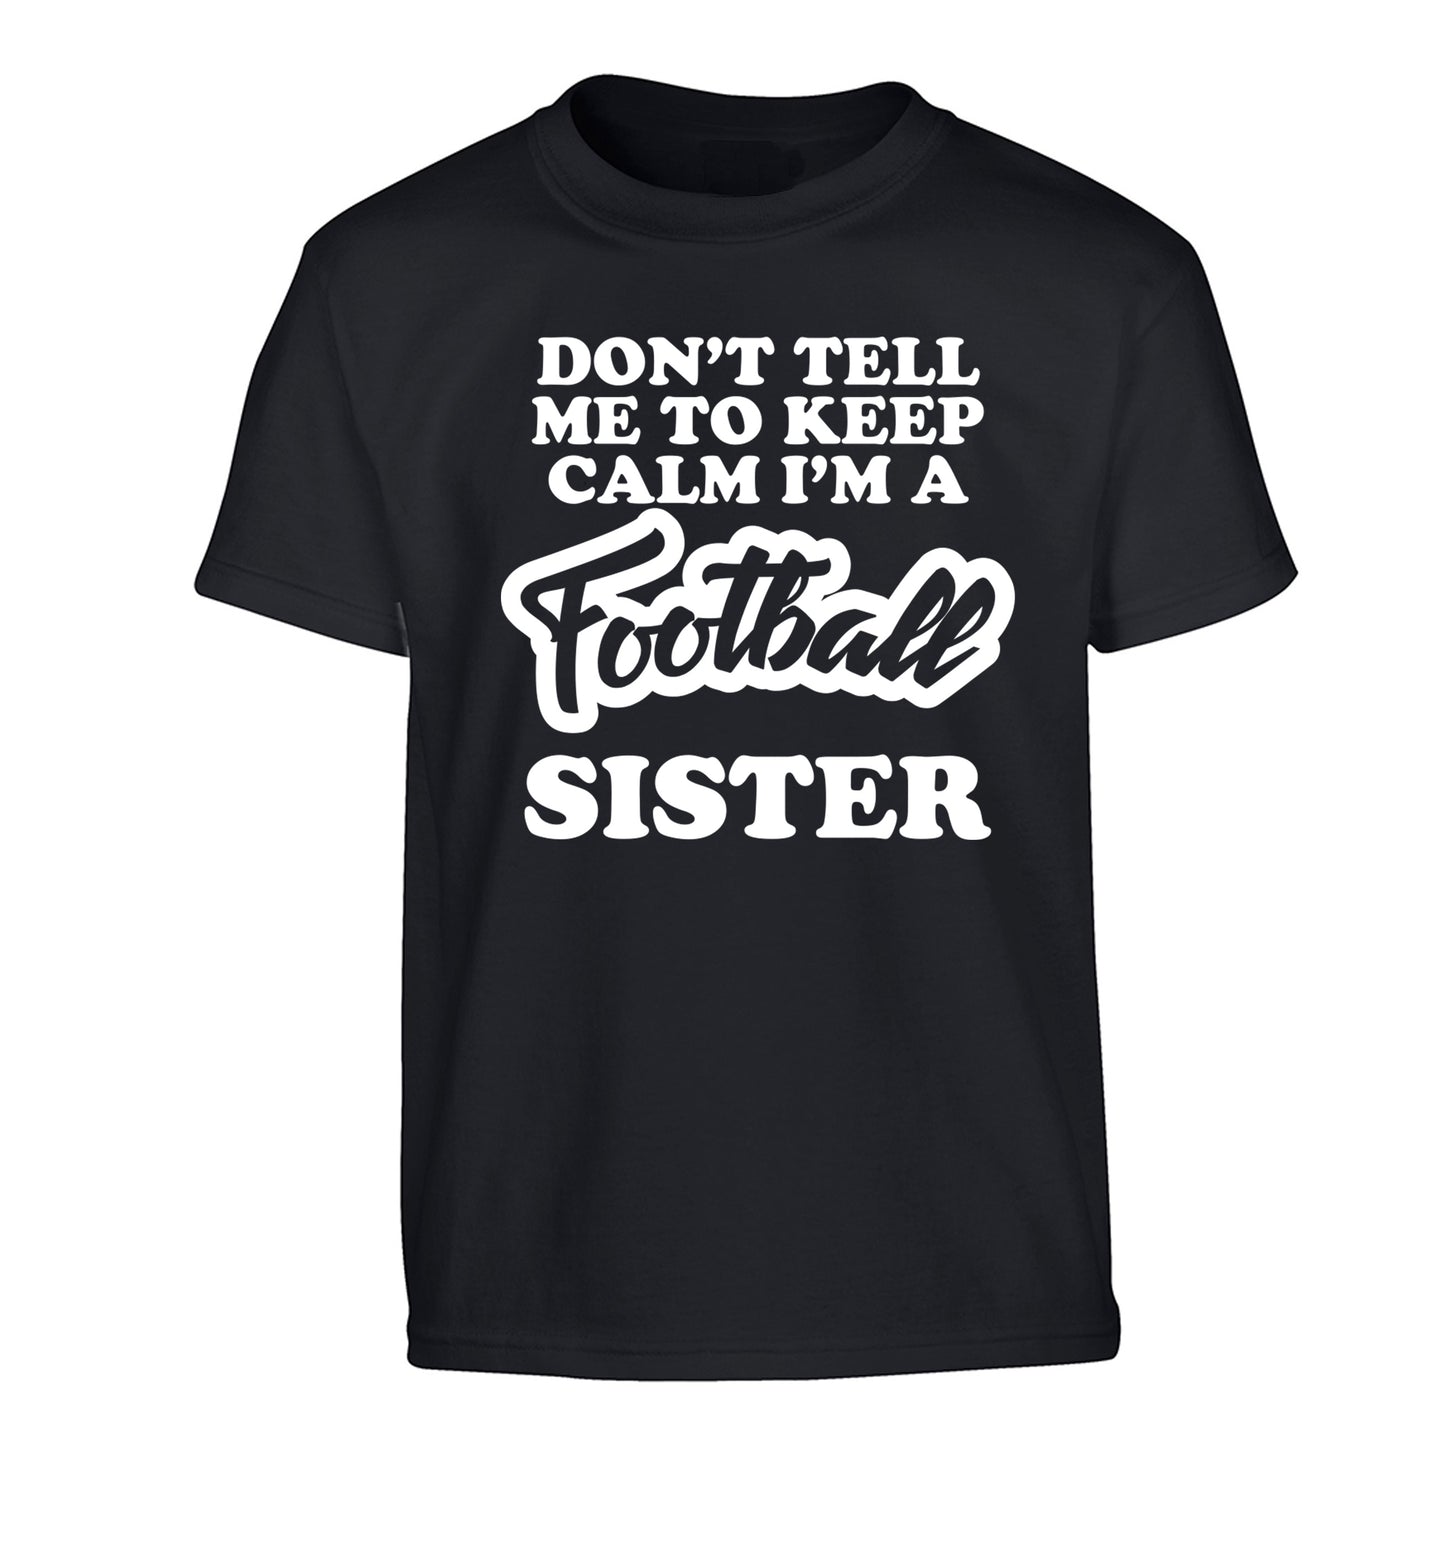 Don't tell me to keep calm I'm a football sister Children's black Tshirt 12-14 Years